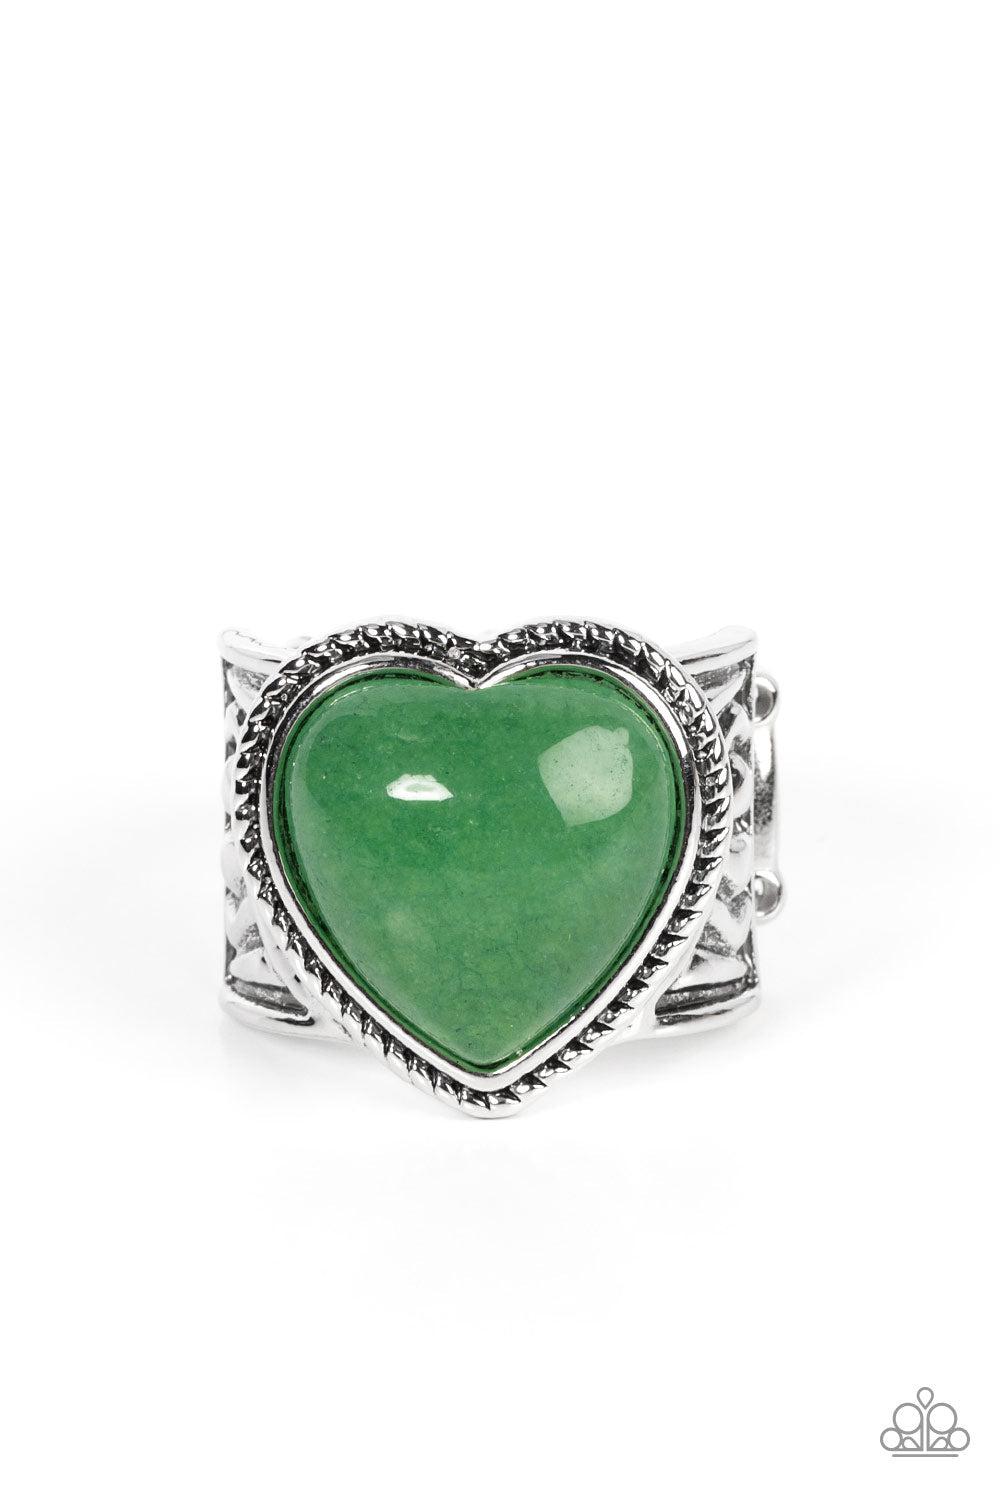 Stone Age Admirer Green Stone Heart Ring - Paparazzi Accessories- lightbox - CarasShop.com - $5 Jewelry by Cara Jewels